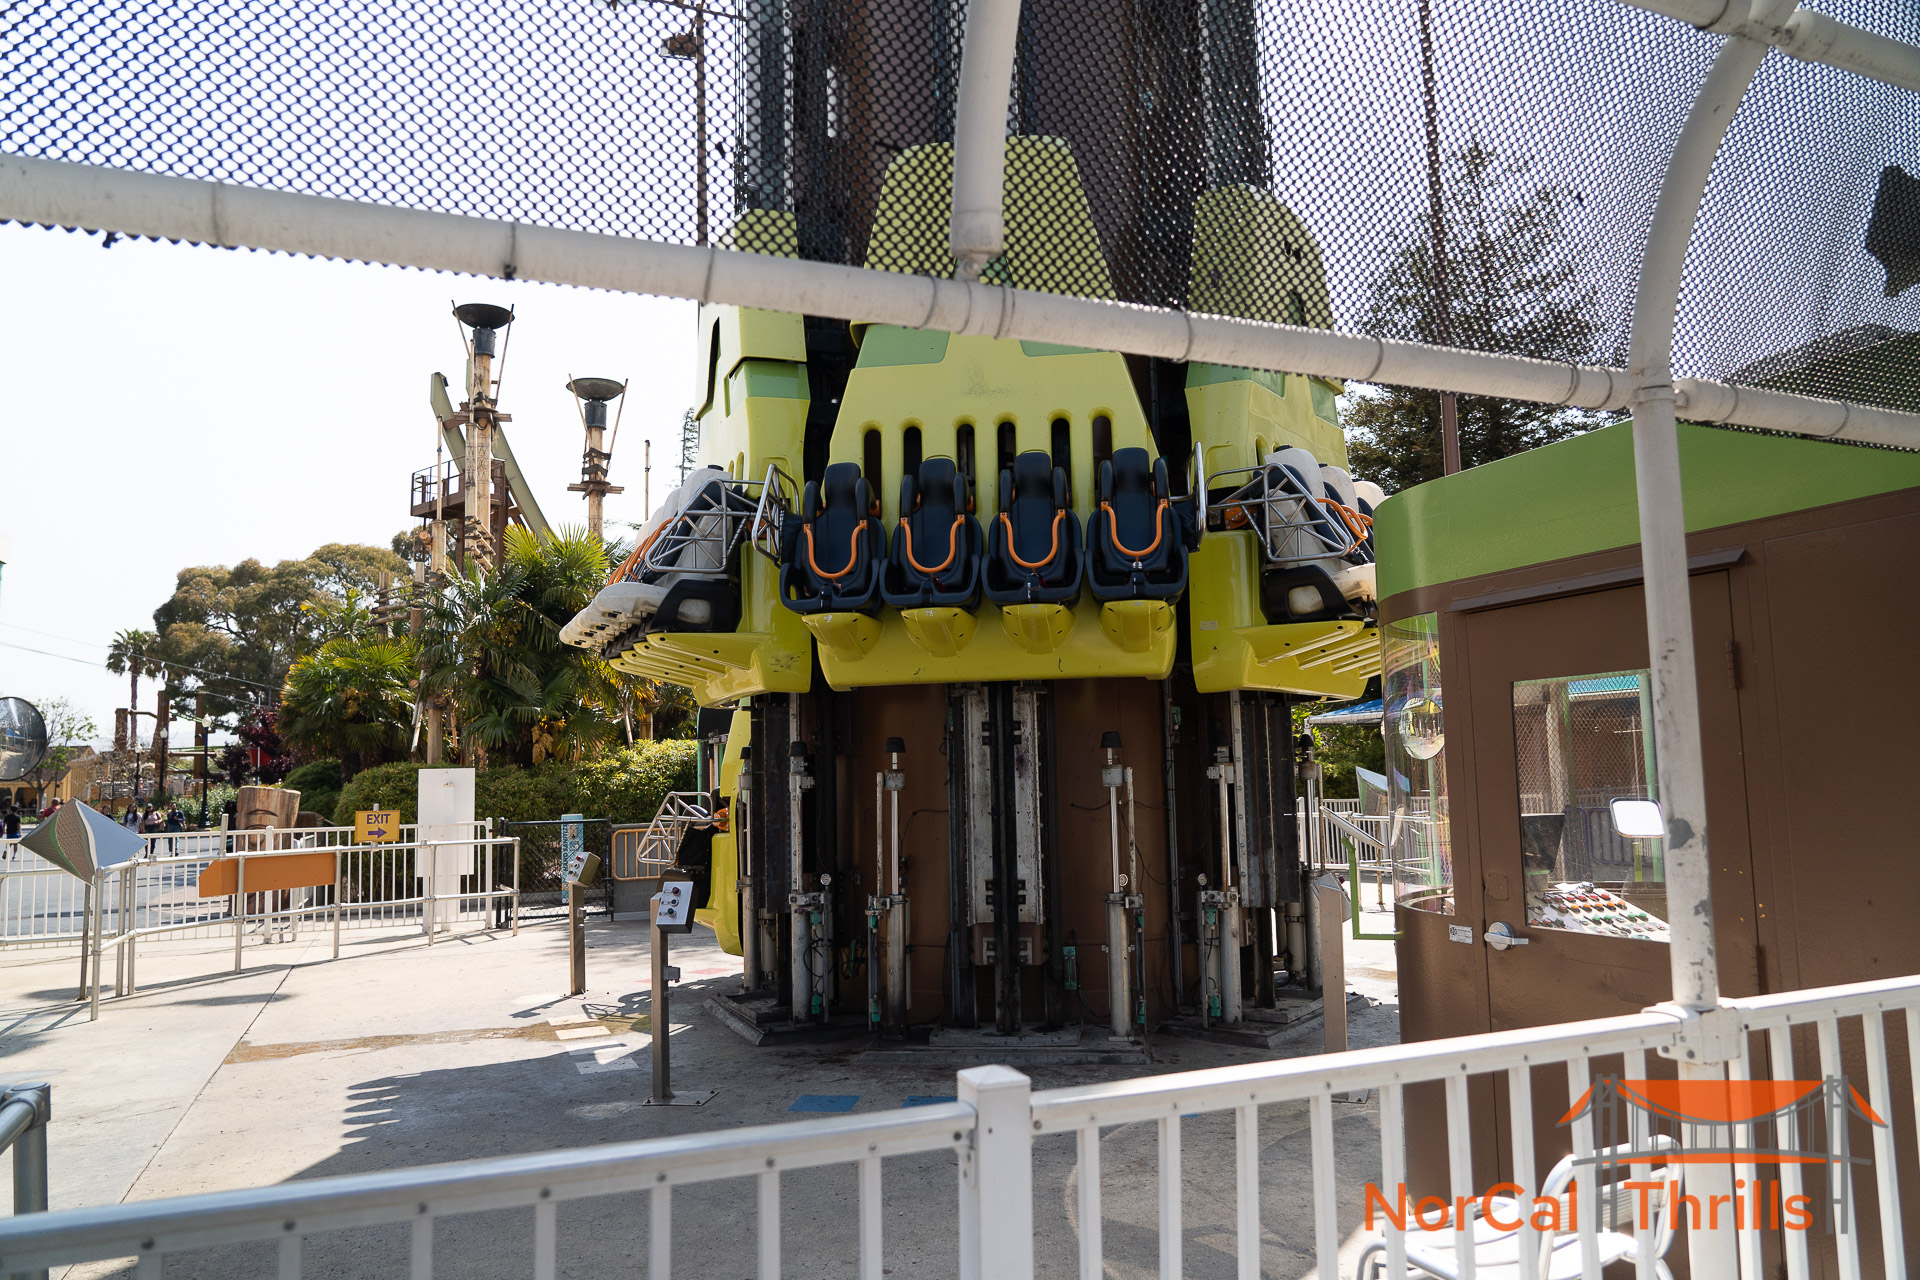 Other Ride Updates